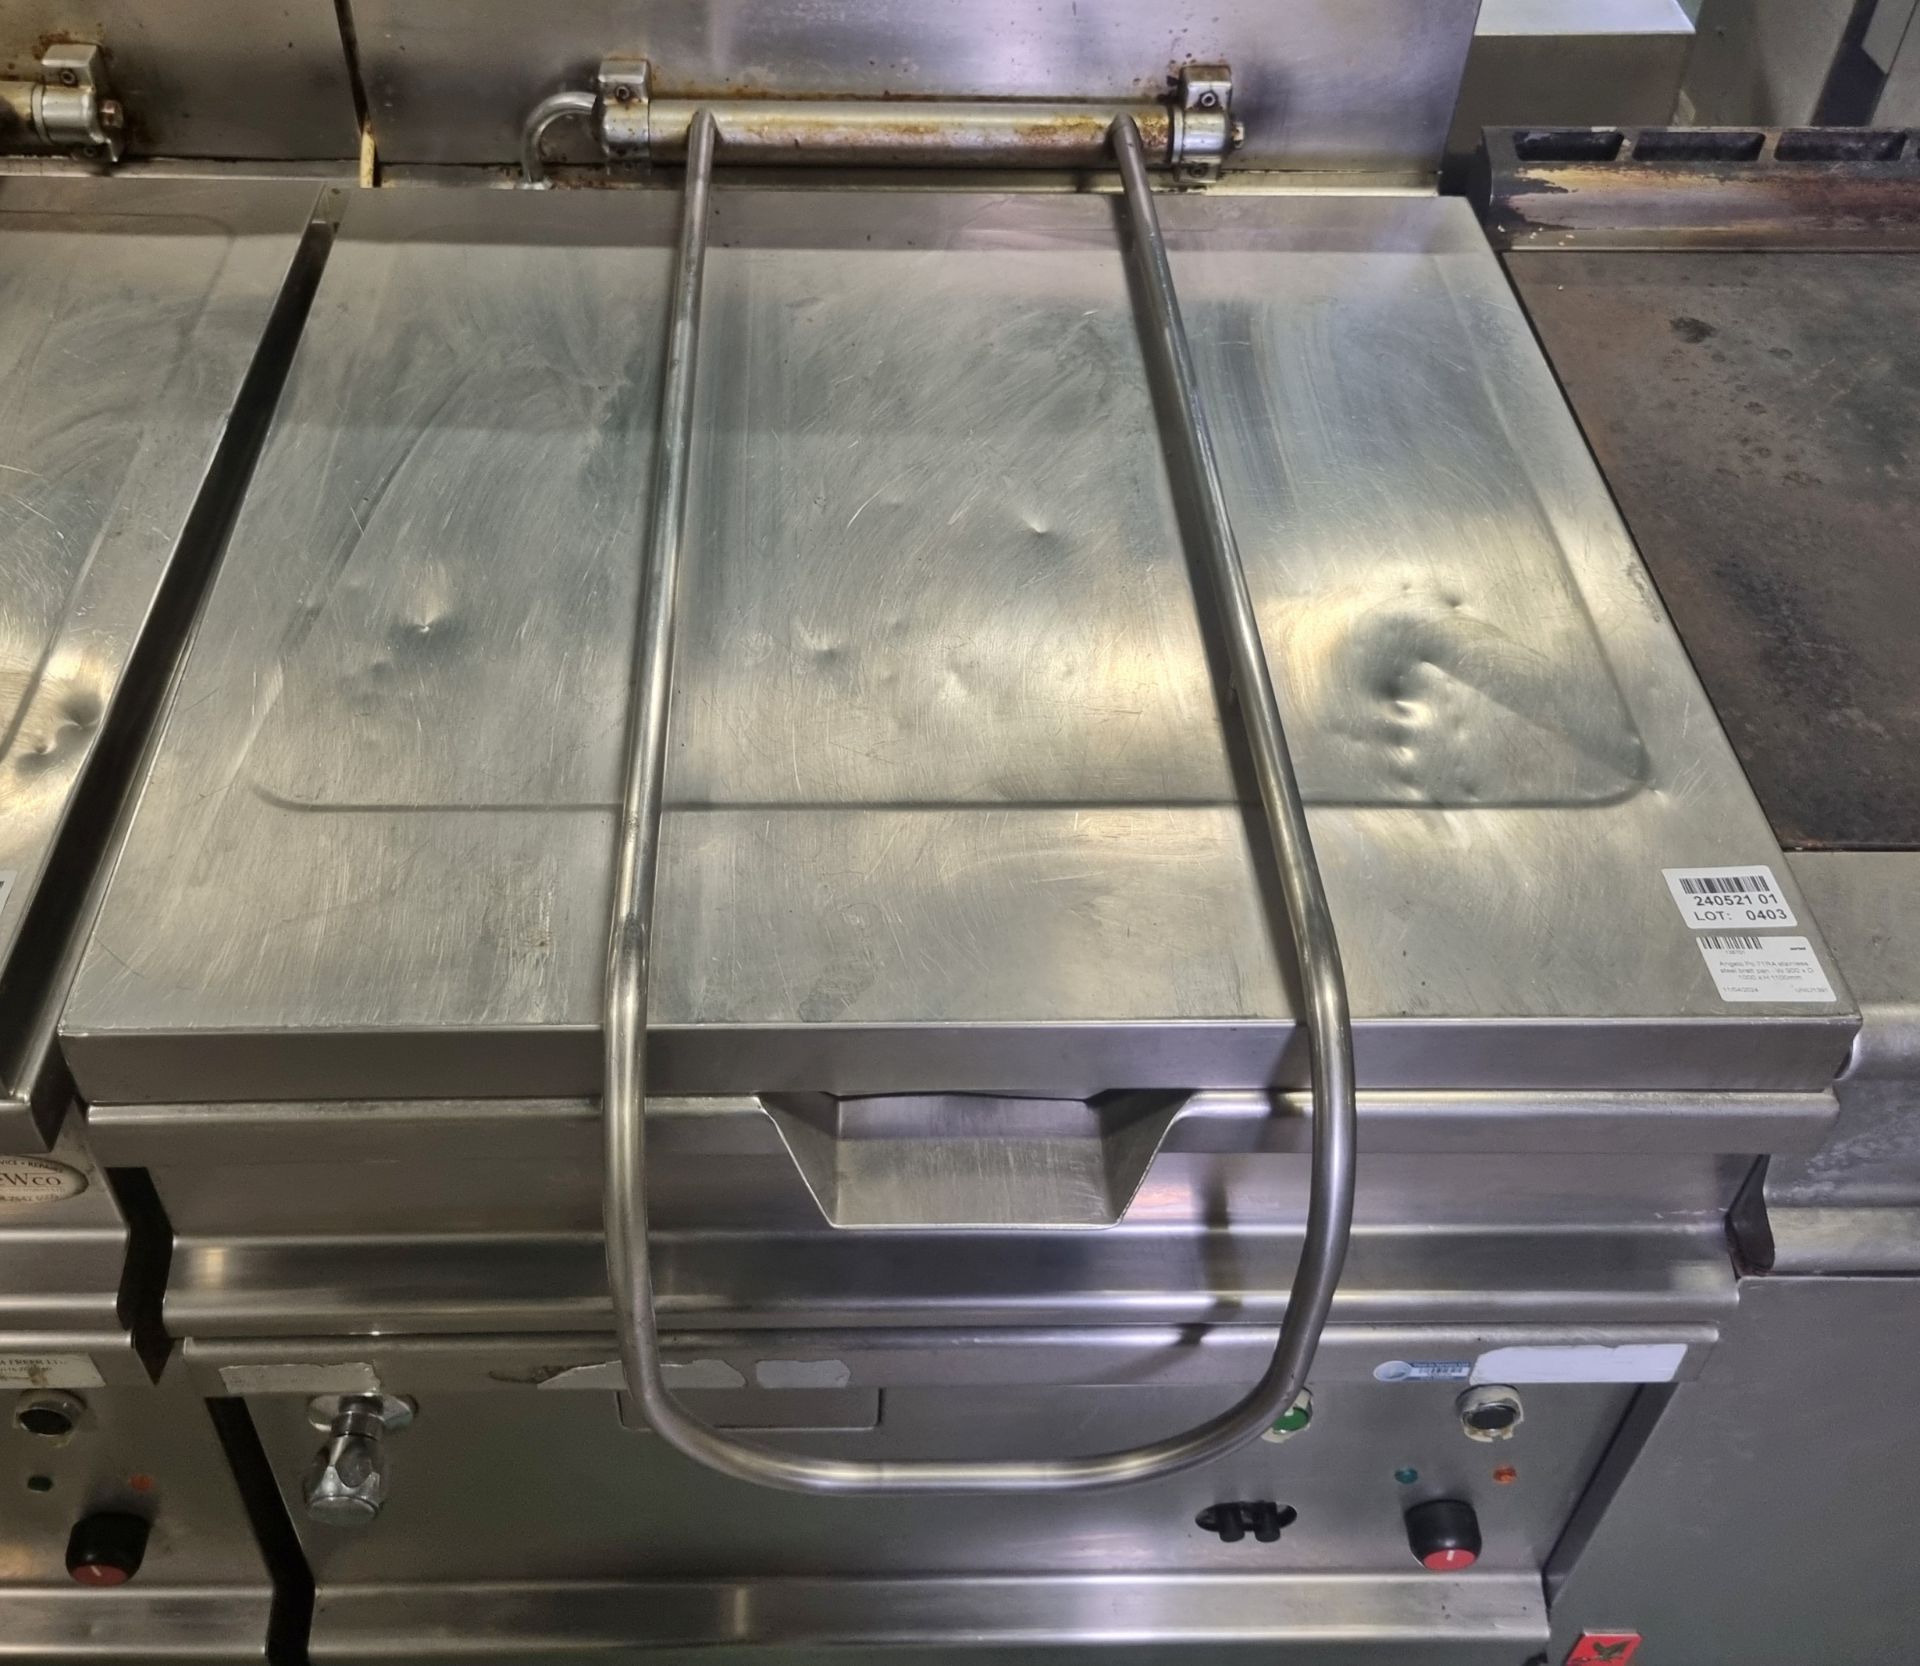 Angelo Po 71RA stainless steel electric bratt pan - W 900 x D 1000 x H 1100mm - Image 2 of 5